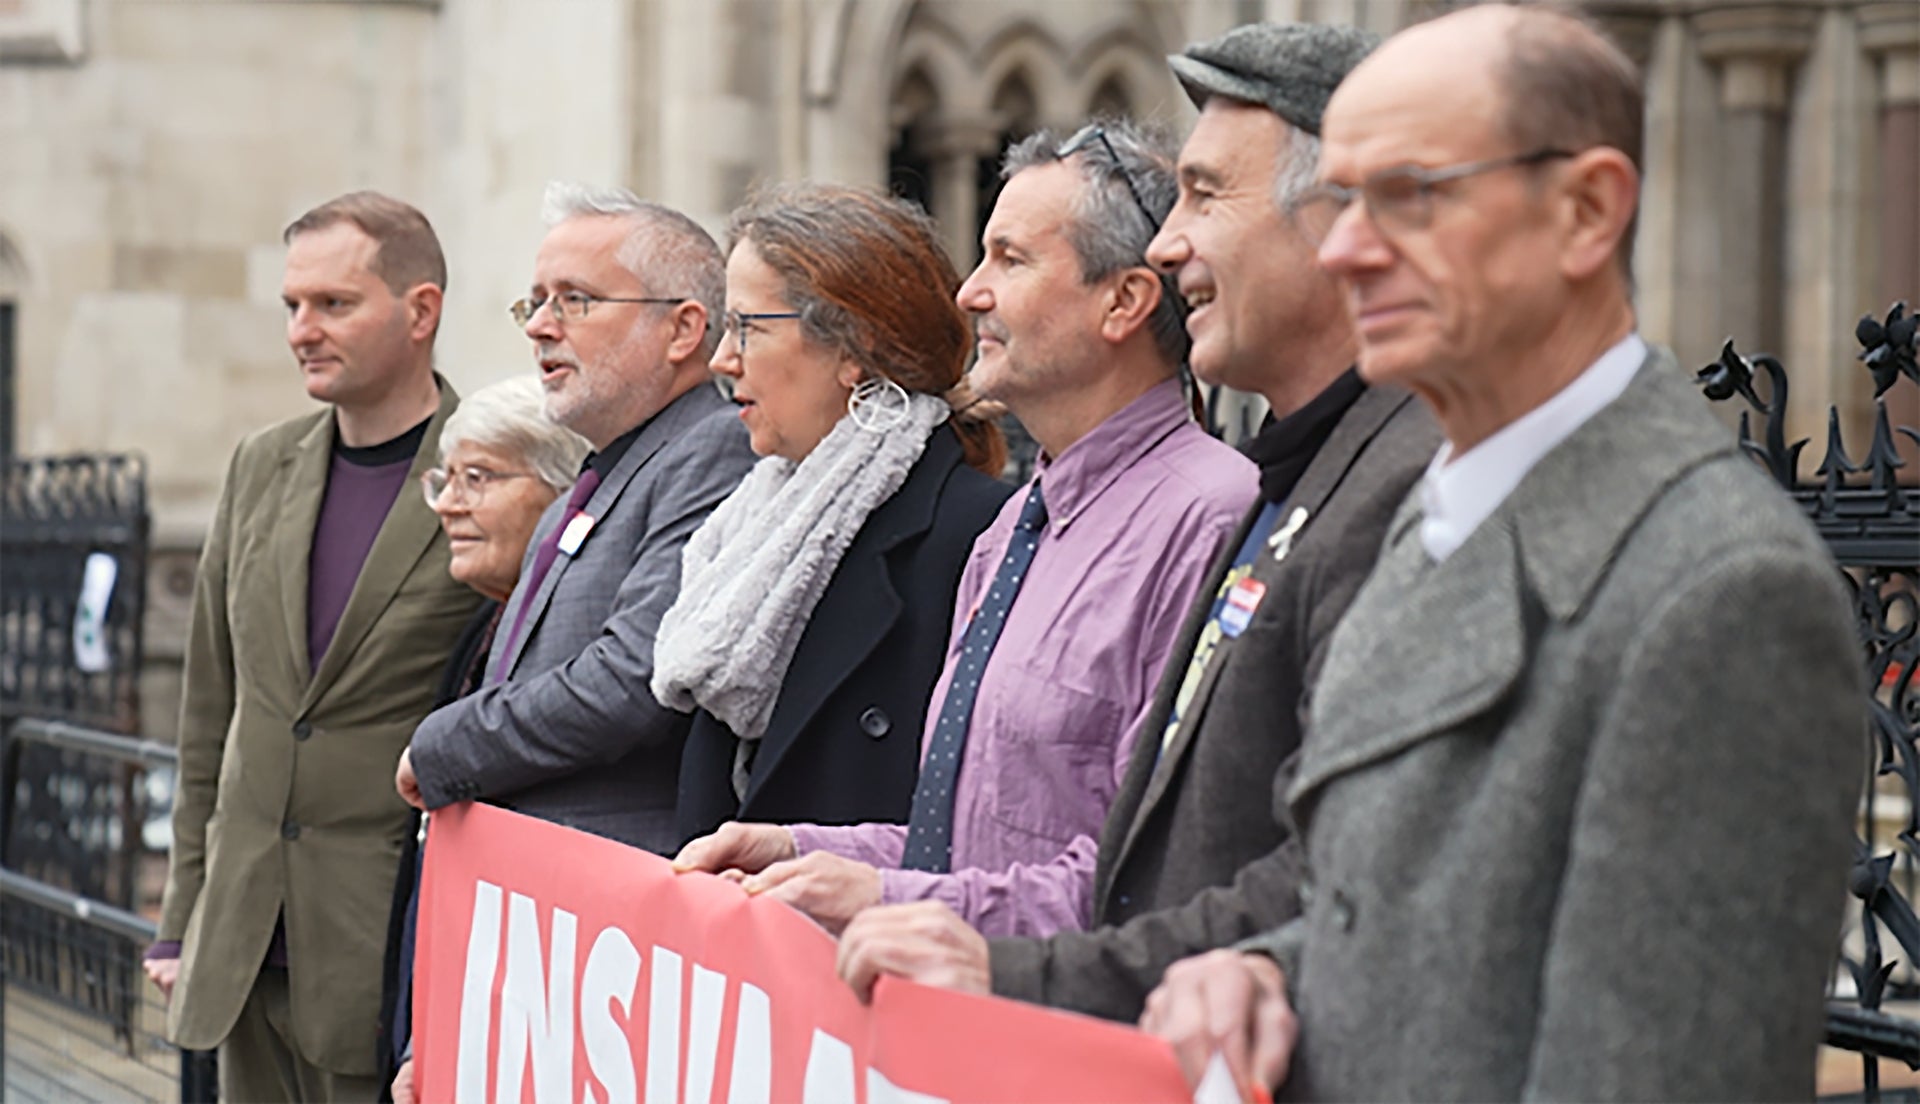 Seven members of the climate action group Insulate Britain appeared at the High Court in London (Elspeth Keep/PA)